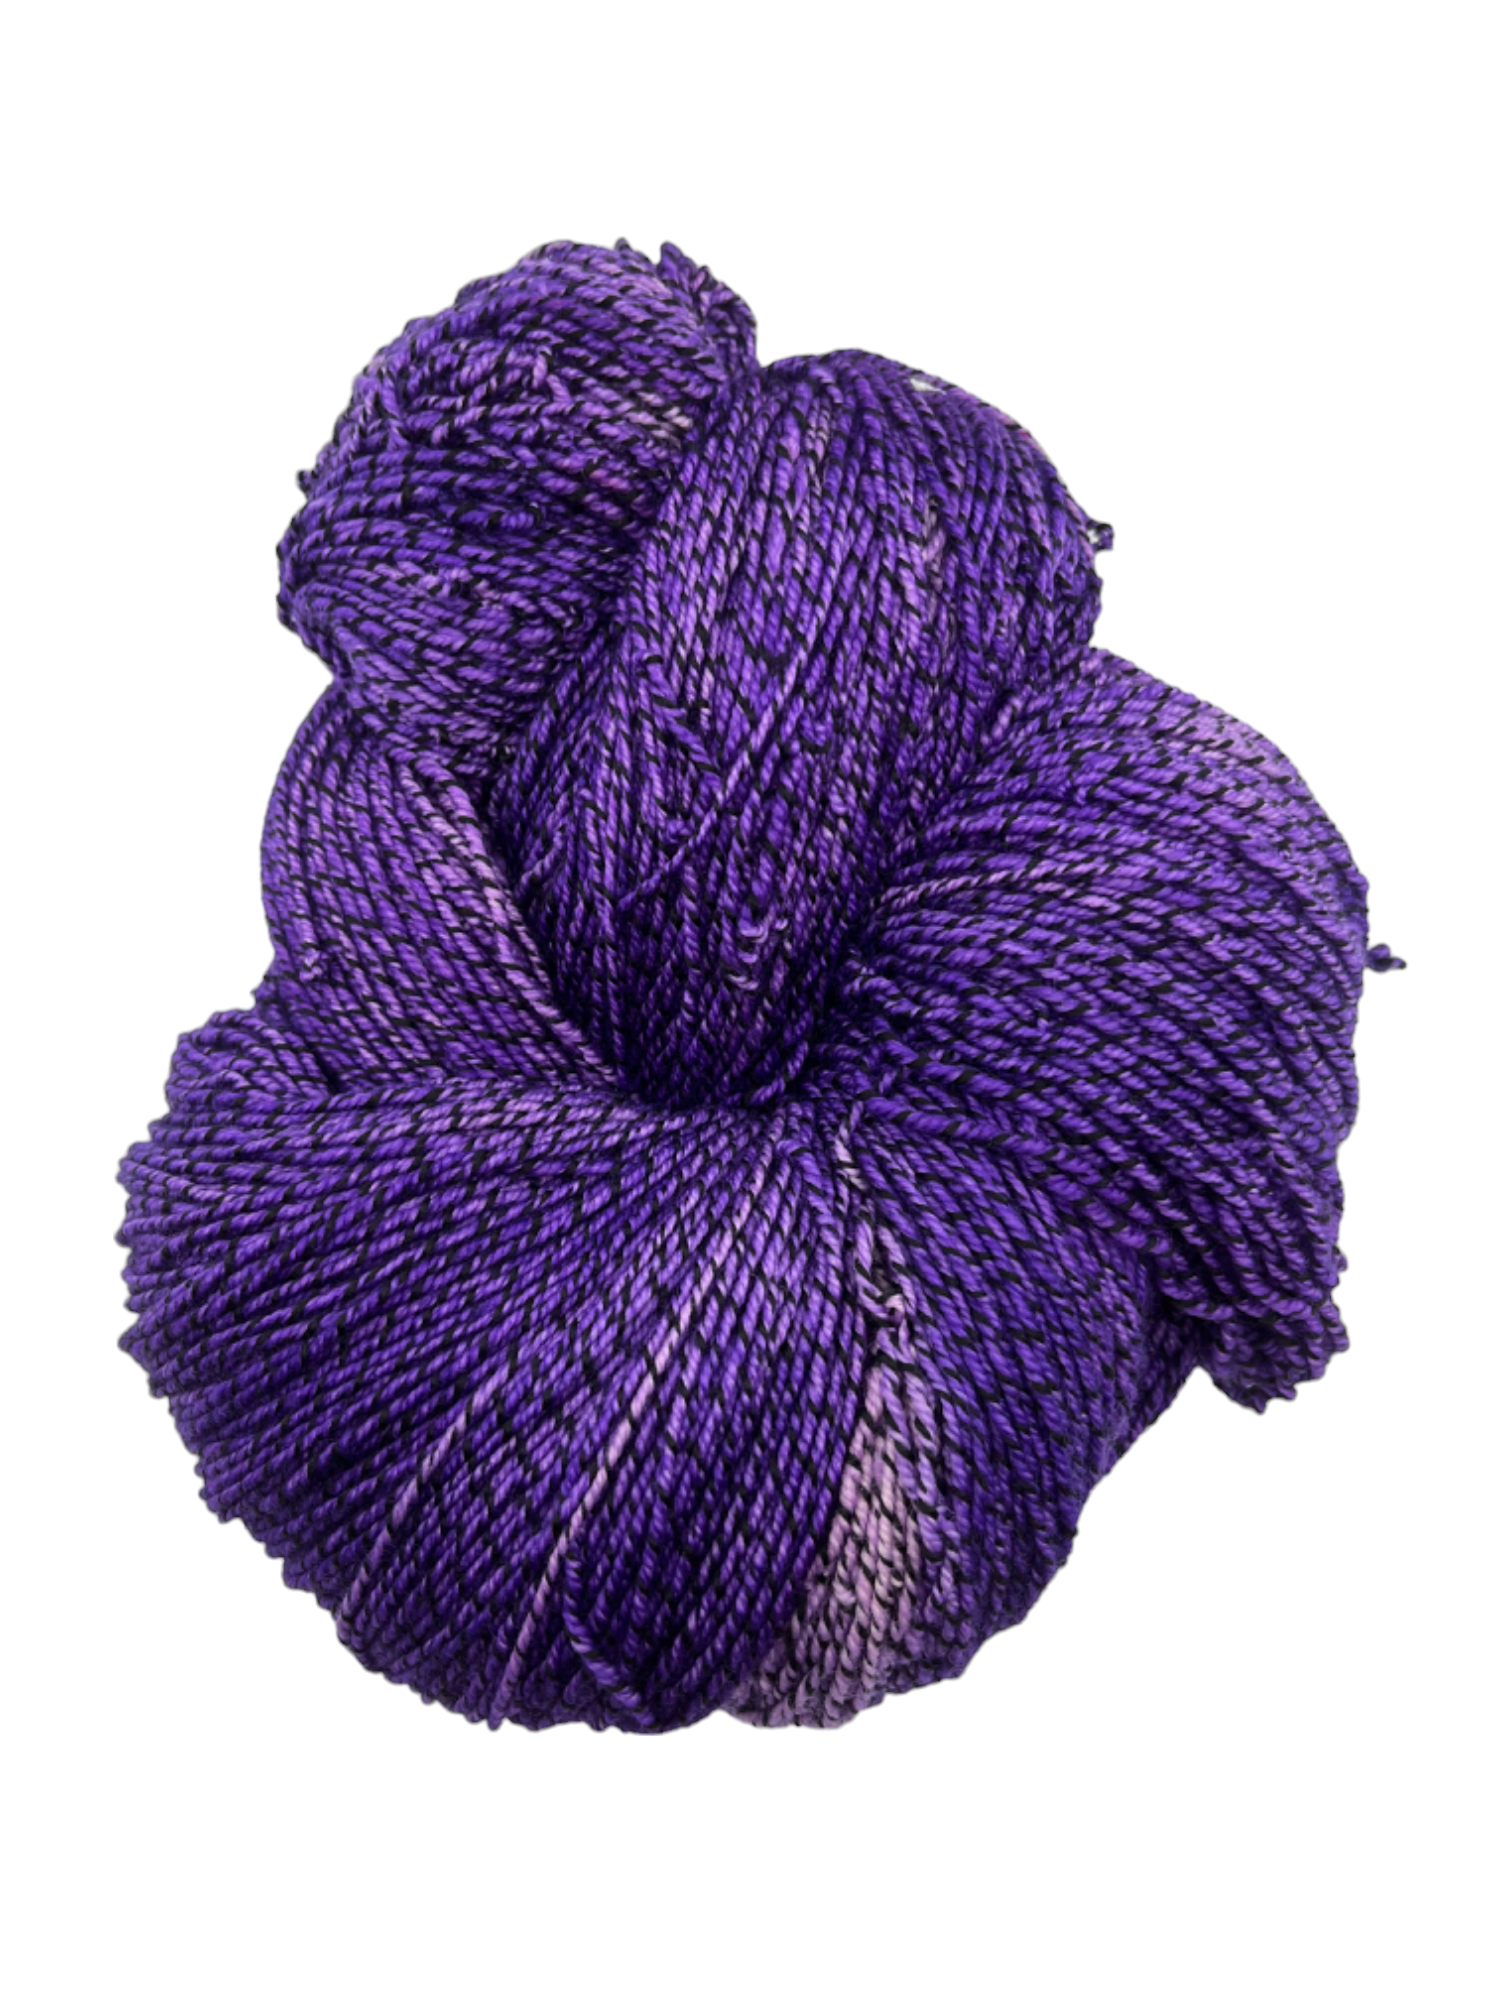 Nightshade Worsted Queen Size 38